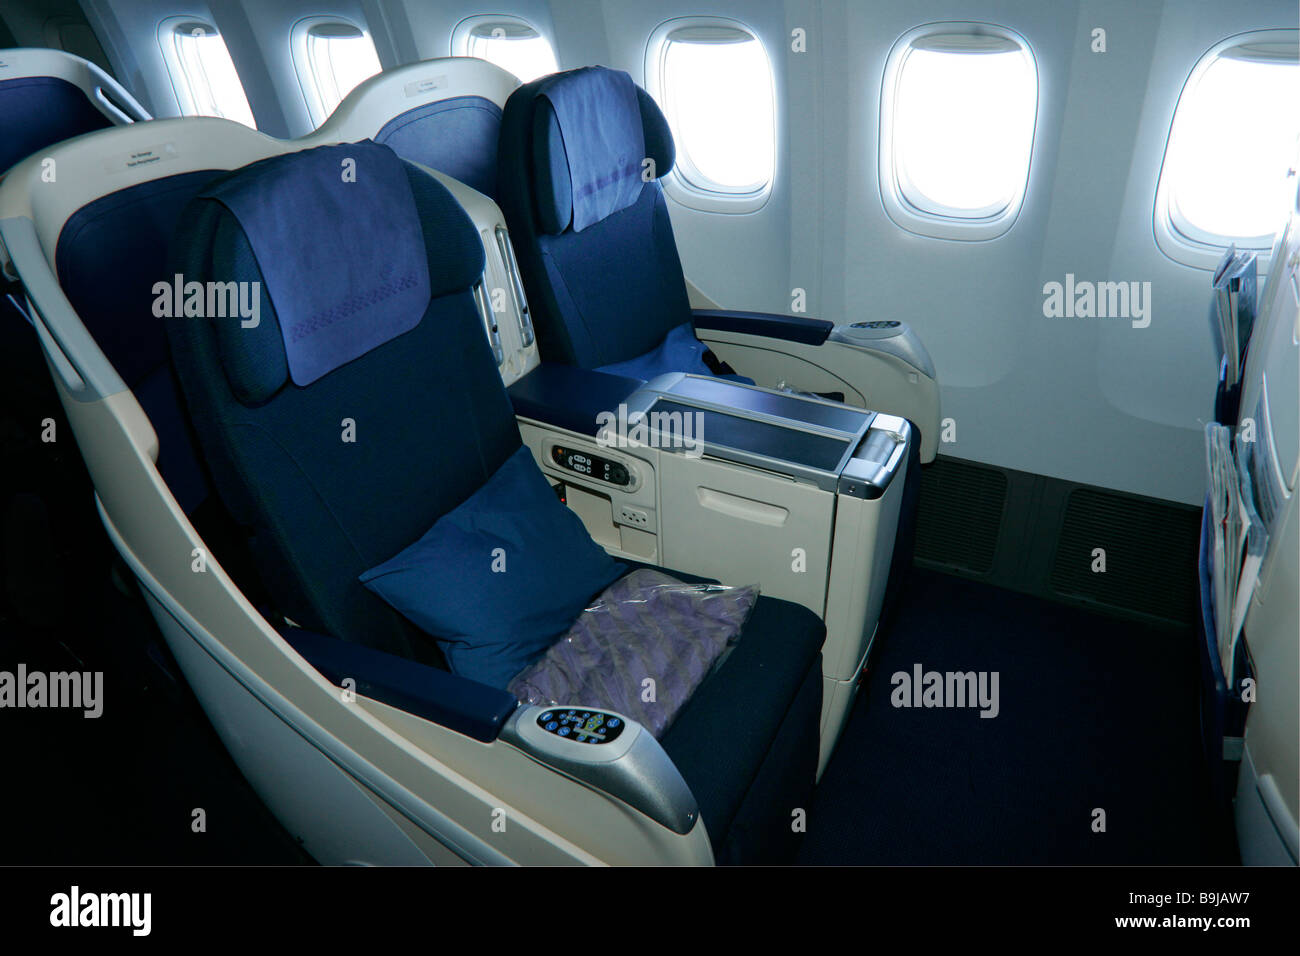 Gold Club Class, Business Class in an aeroplane, Boeing 777-200 Stock Photo